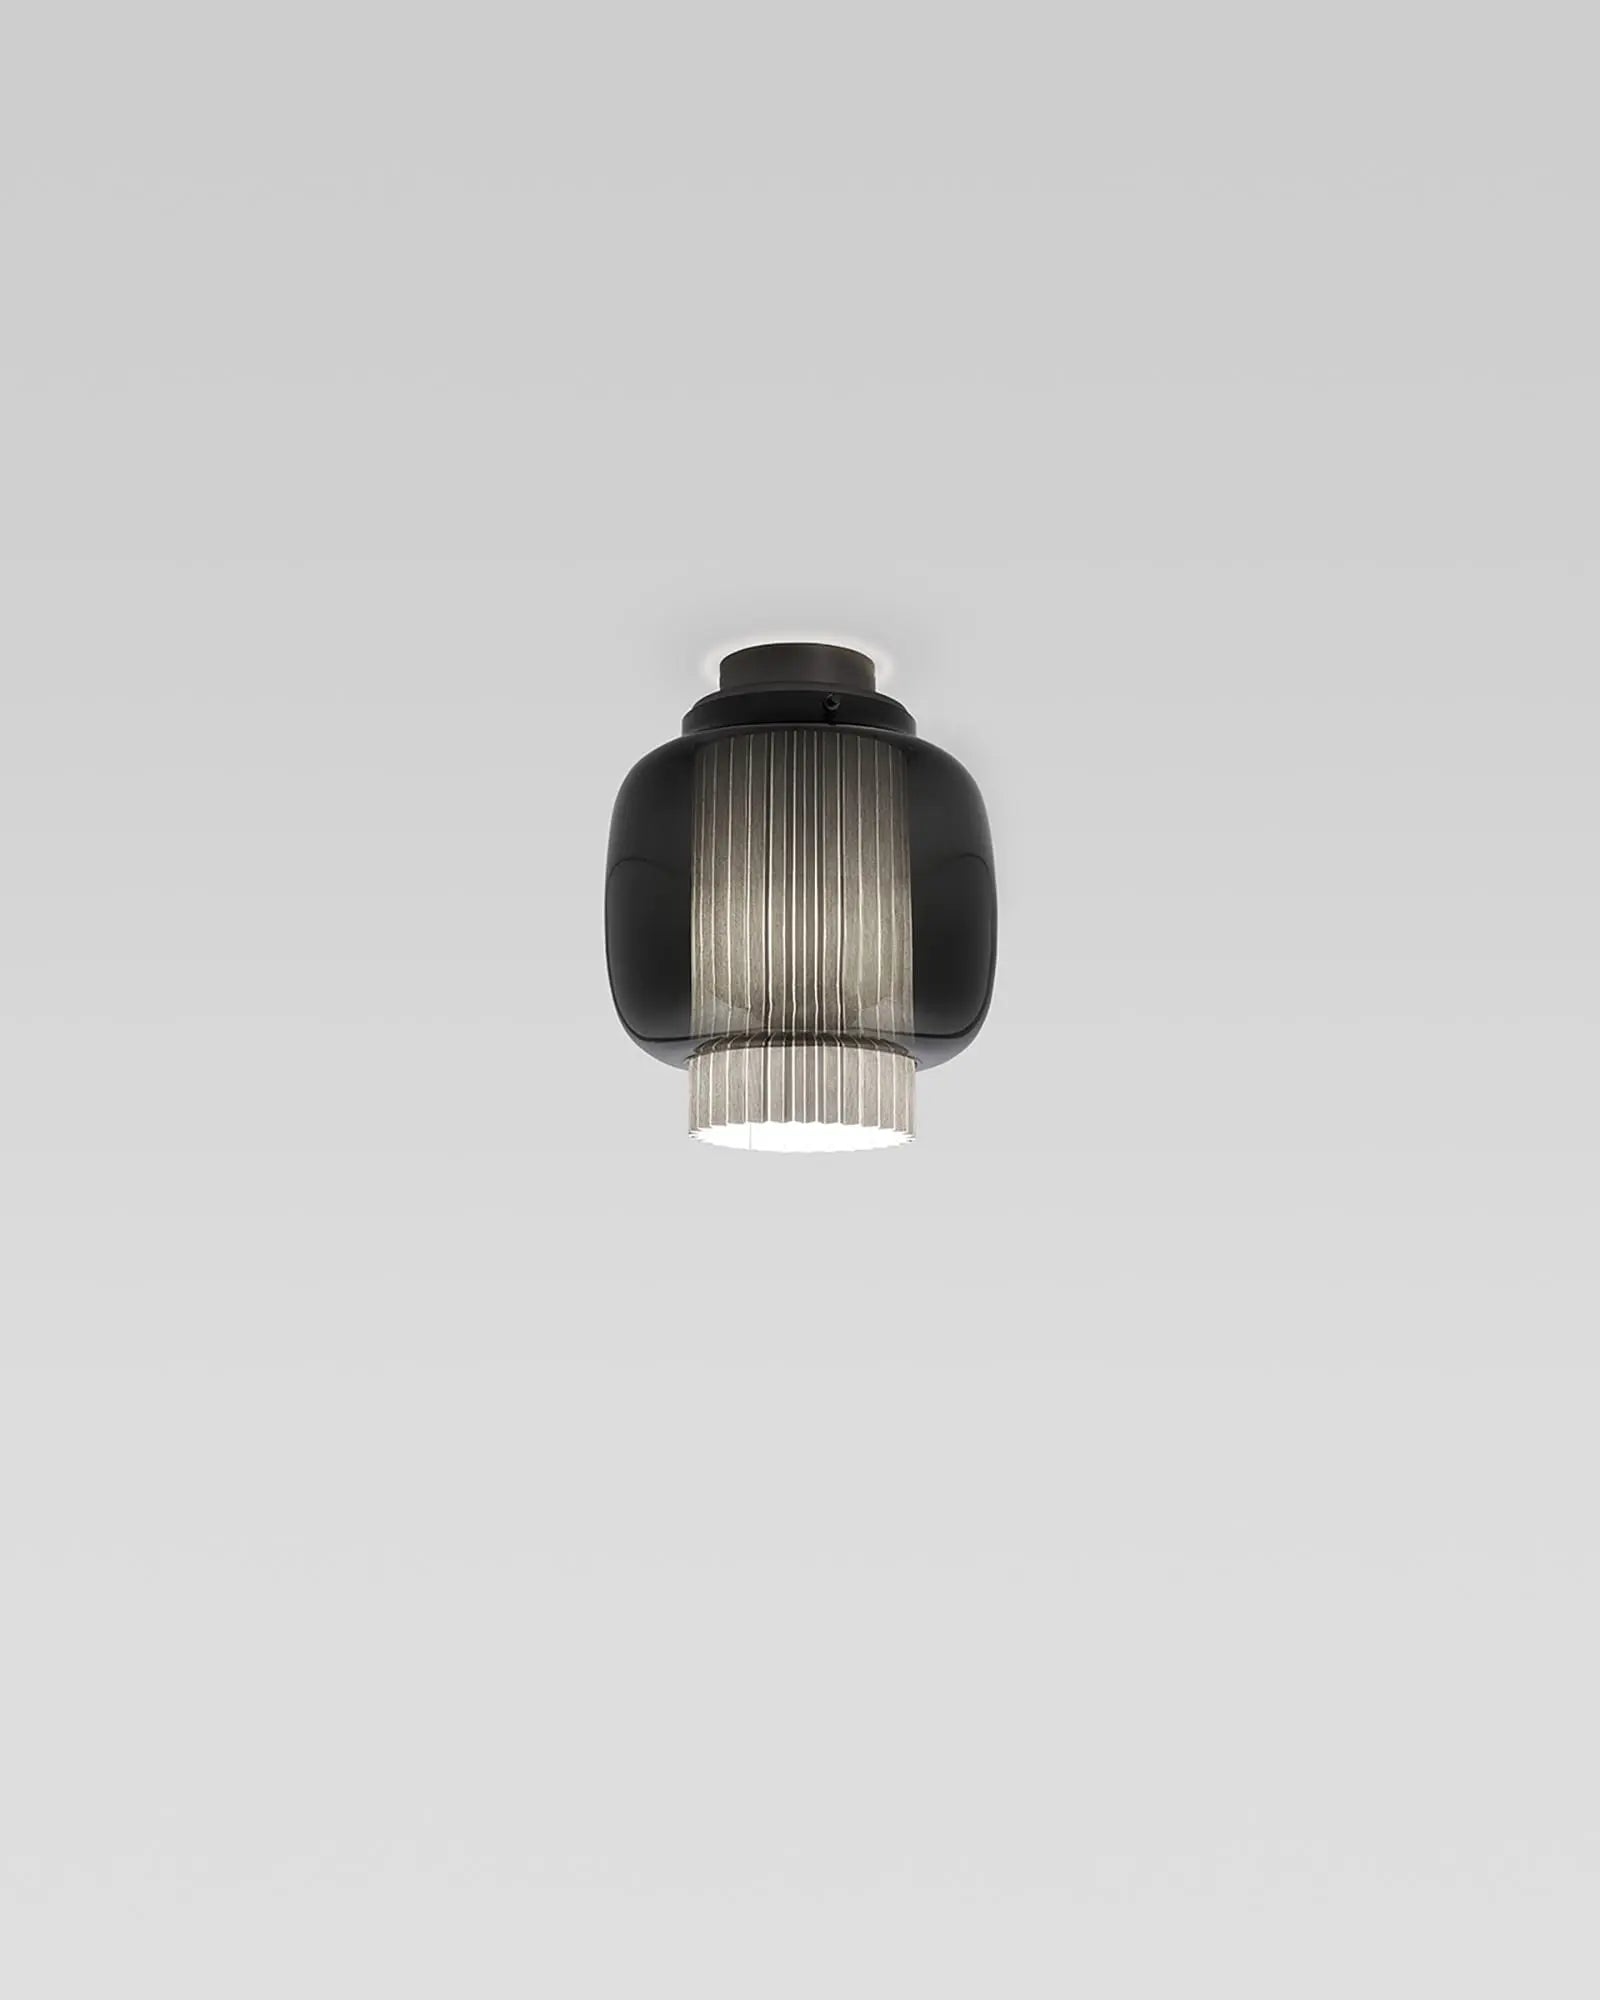 Manila Ceiling Light in graphite with grey fabric small